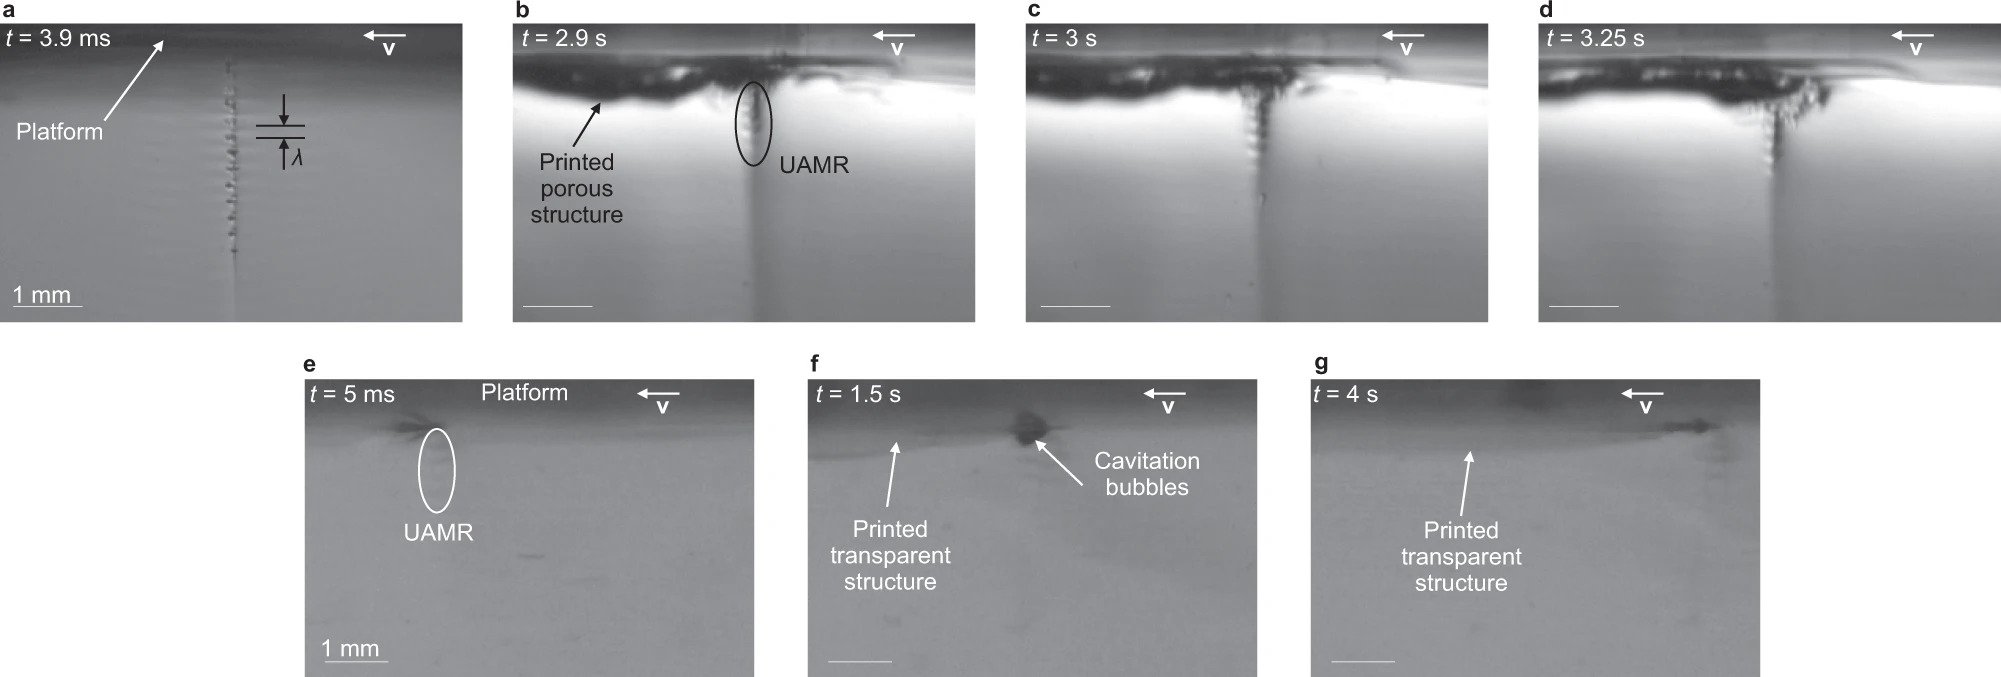 Porous and transparent printing observation of within the ultra-active micro reactor (UAMR) on the platform. Image via Nature Communications.